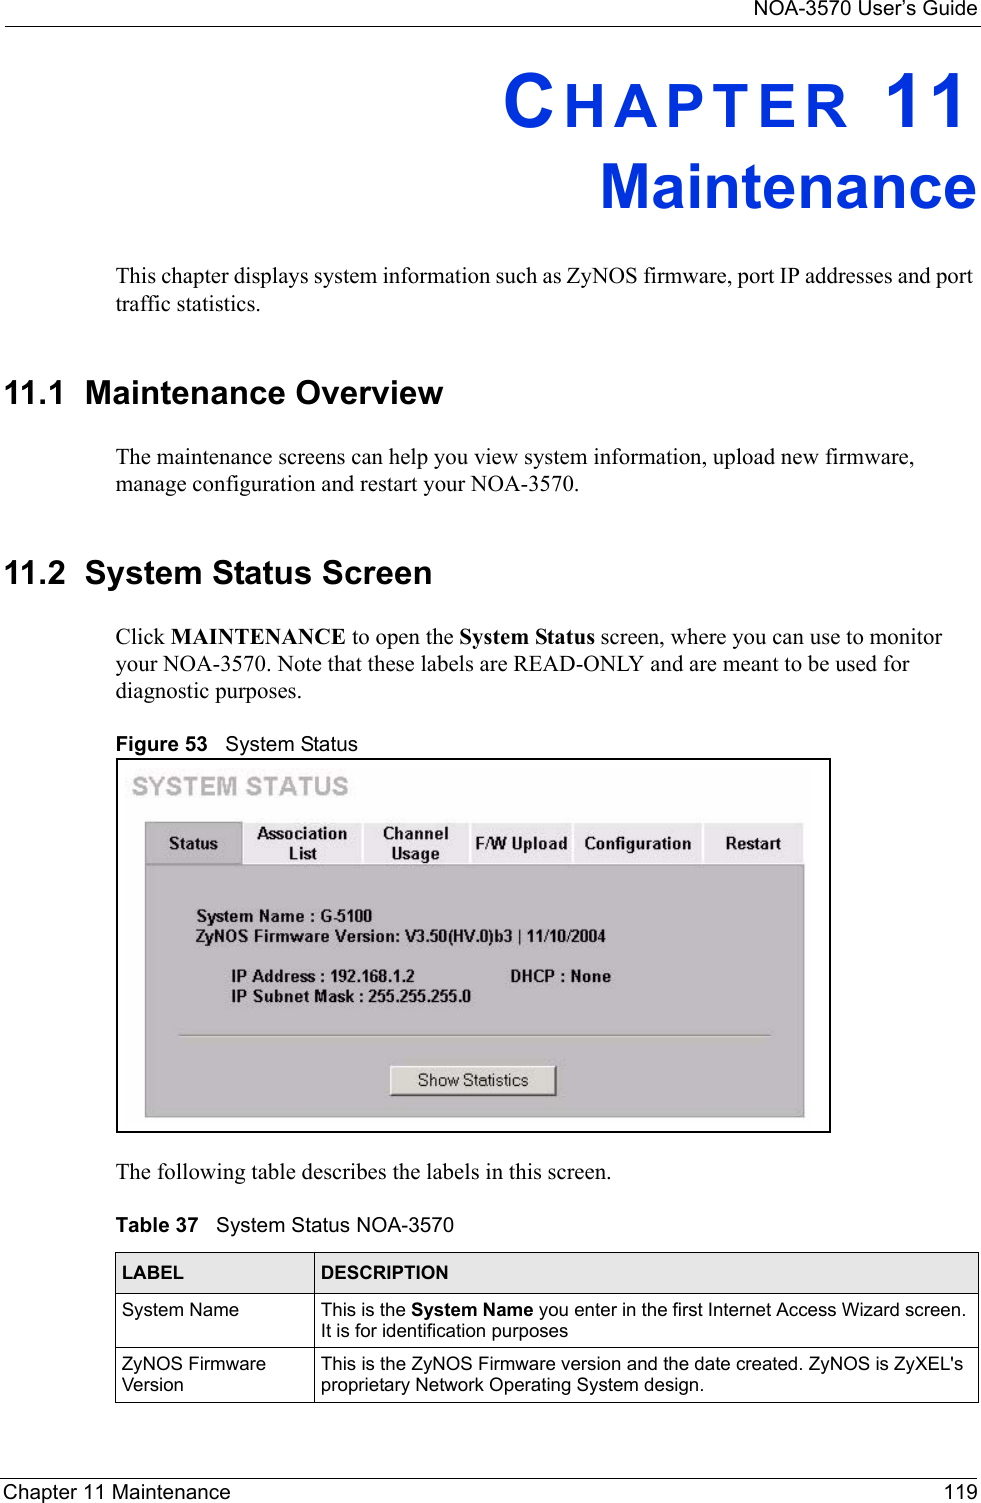 NOA-3570 User’s GuideChapter 11 Maintenance 119CHAPTER 11MaintenanceThis chapter displays system information such as ZyNOS firmware, port IP addresses and port traffic statistics.11.1  Maintenance OverviewThe maintenance screens can help you view system information, upload new firmware, manage configuration and restart your NOA-3570. 11.2  System Status ScreenClick MAINTENANCE to open the System Status screen, where you can use to monitor your NOA-3570. Note that these labels are READ-ONLY and are meant to be used for diagnostic purposes.Figure 53   System StatusThe following table describes the labels in this screen.Table 37   System Status NOA-3570LABEL DESCRIPTIONSystem Name This is the System Name you enter in the first Internet Access Wizard screen. It is for identification purposesZyNOS Firmware VersionThis is the ZyNOS Firmware version and the date created. ZyNOS is ZyXEL&apos;s proprietary Network Operating System design.